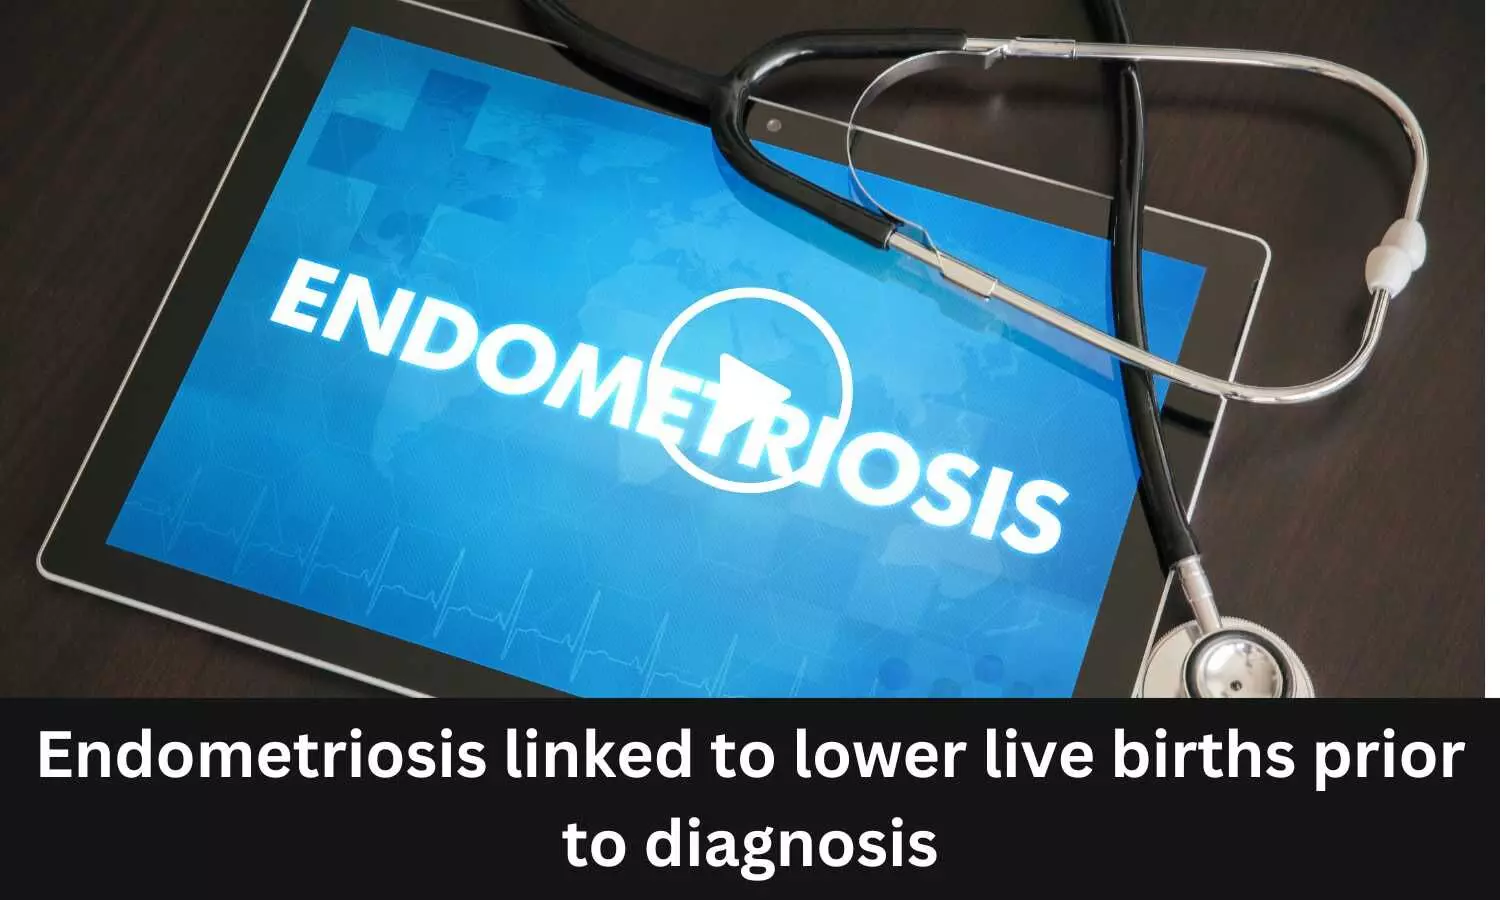 Endometriosis linked to lower live births prior to diagnosis